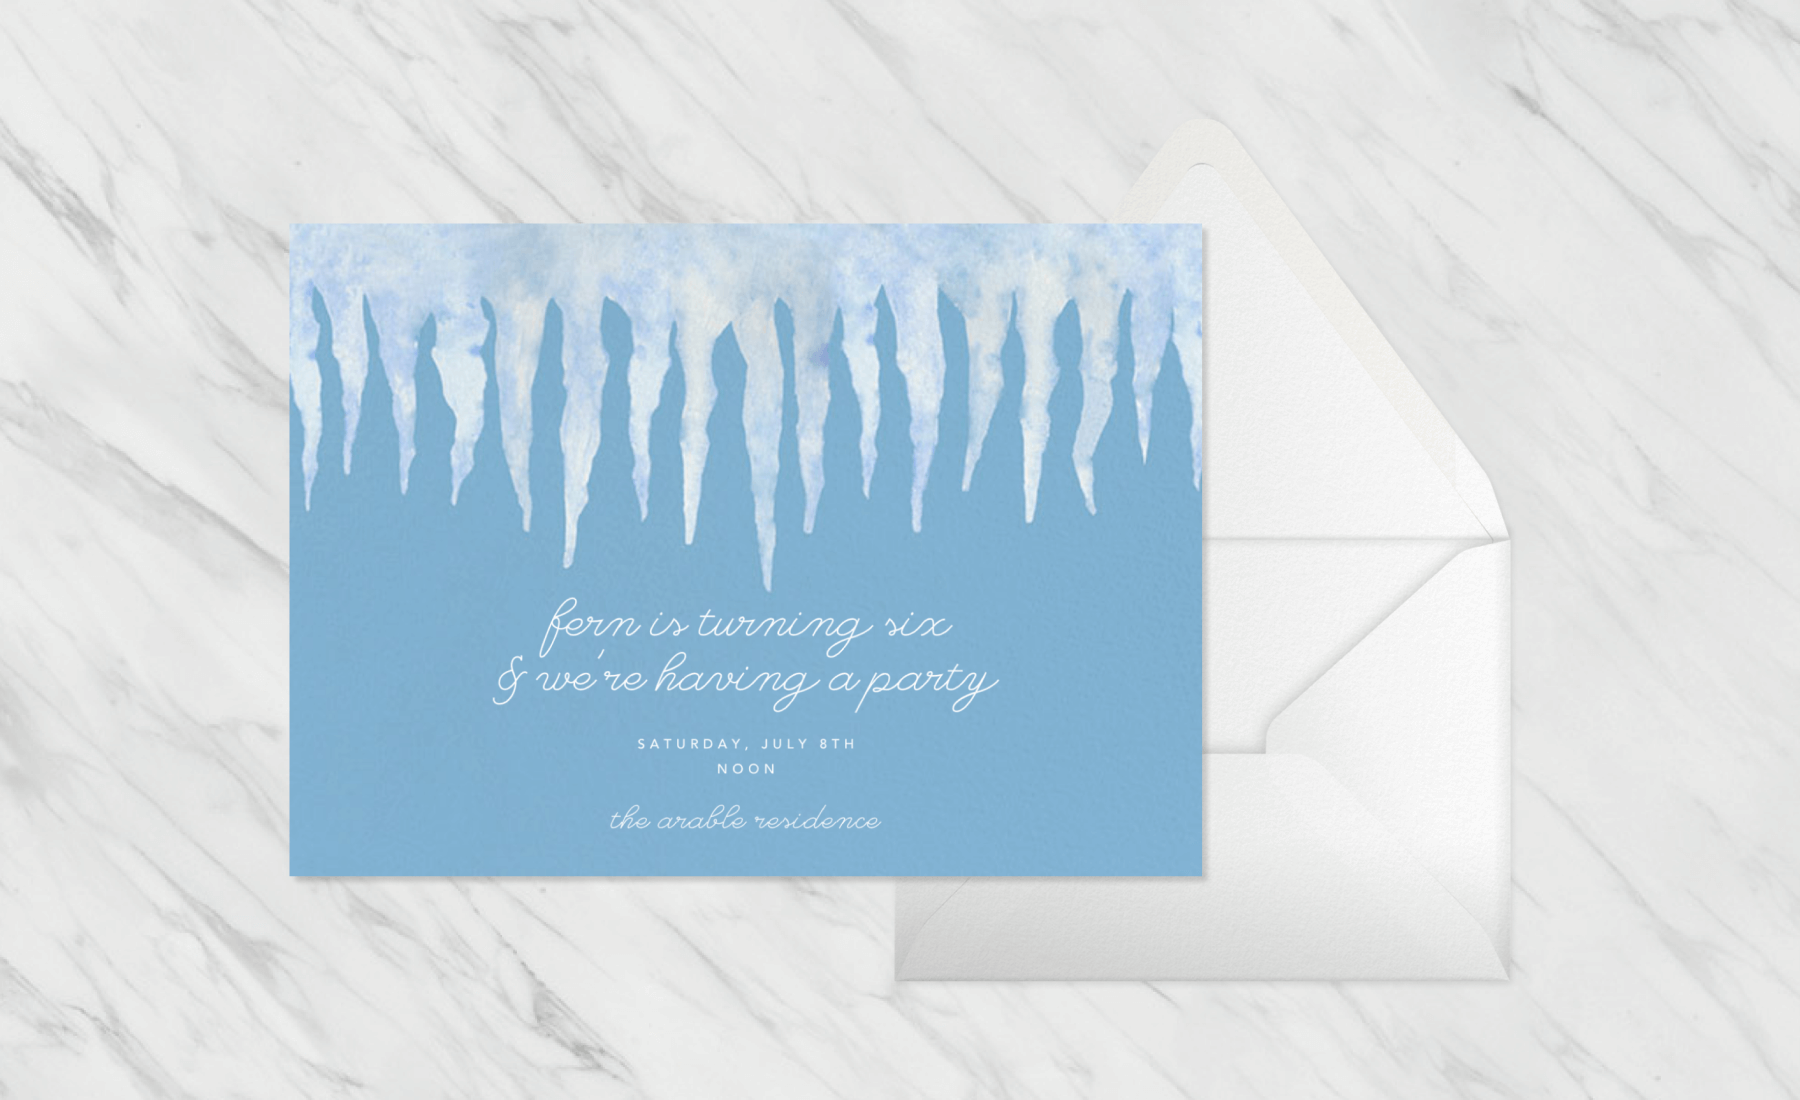 A blue birthday invitation with illustrations of icicles, paired with an envelope.